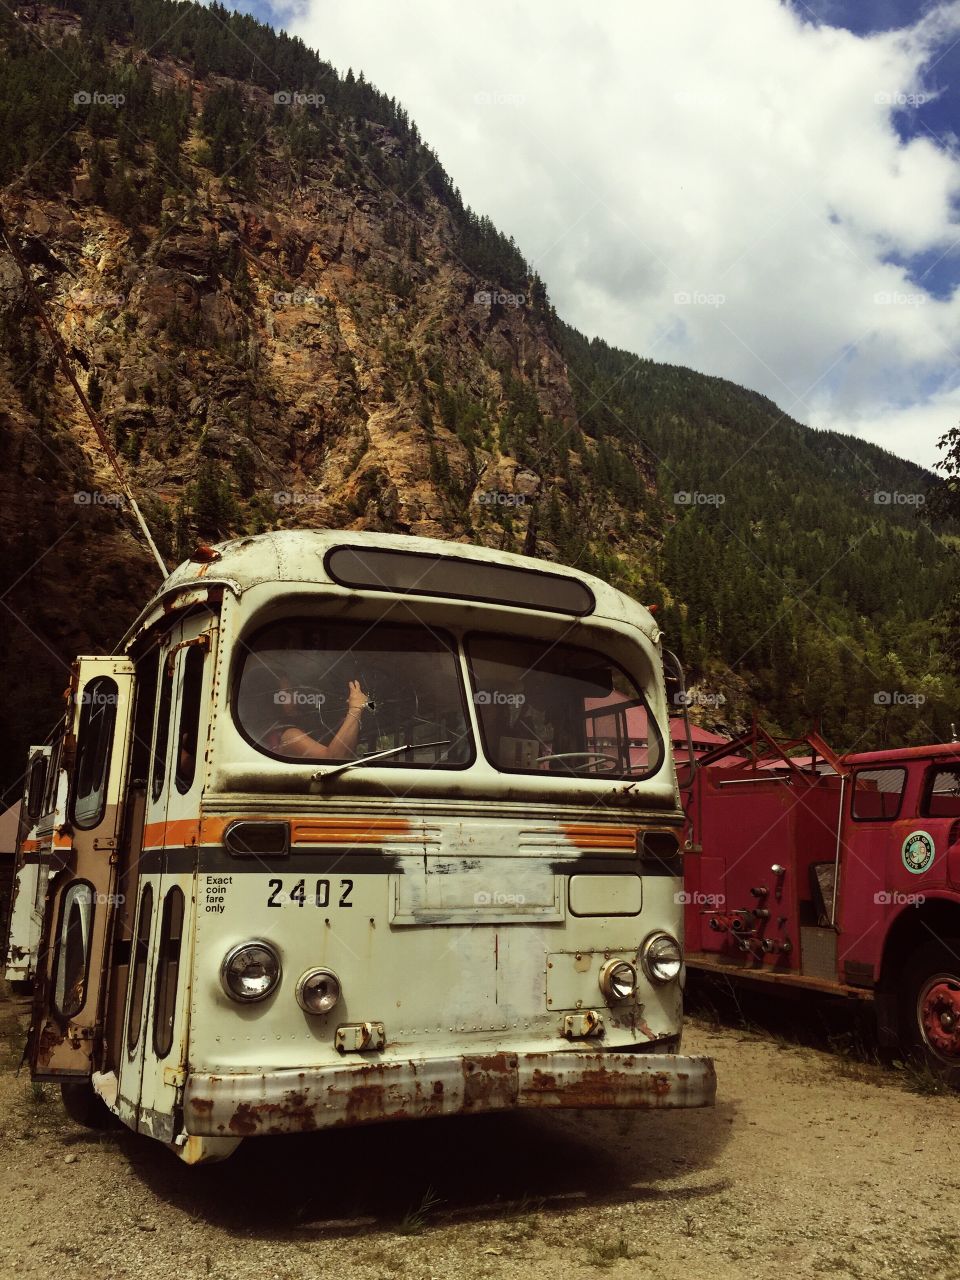 The bus at the ghost town